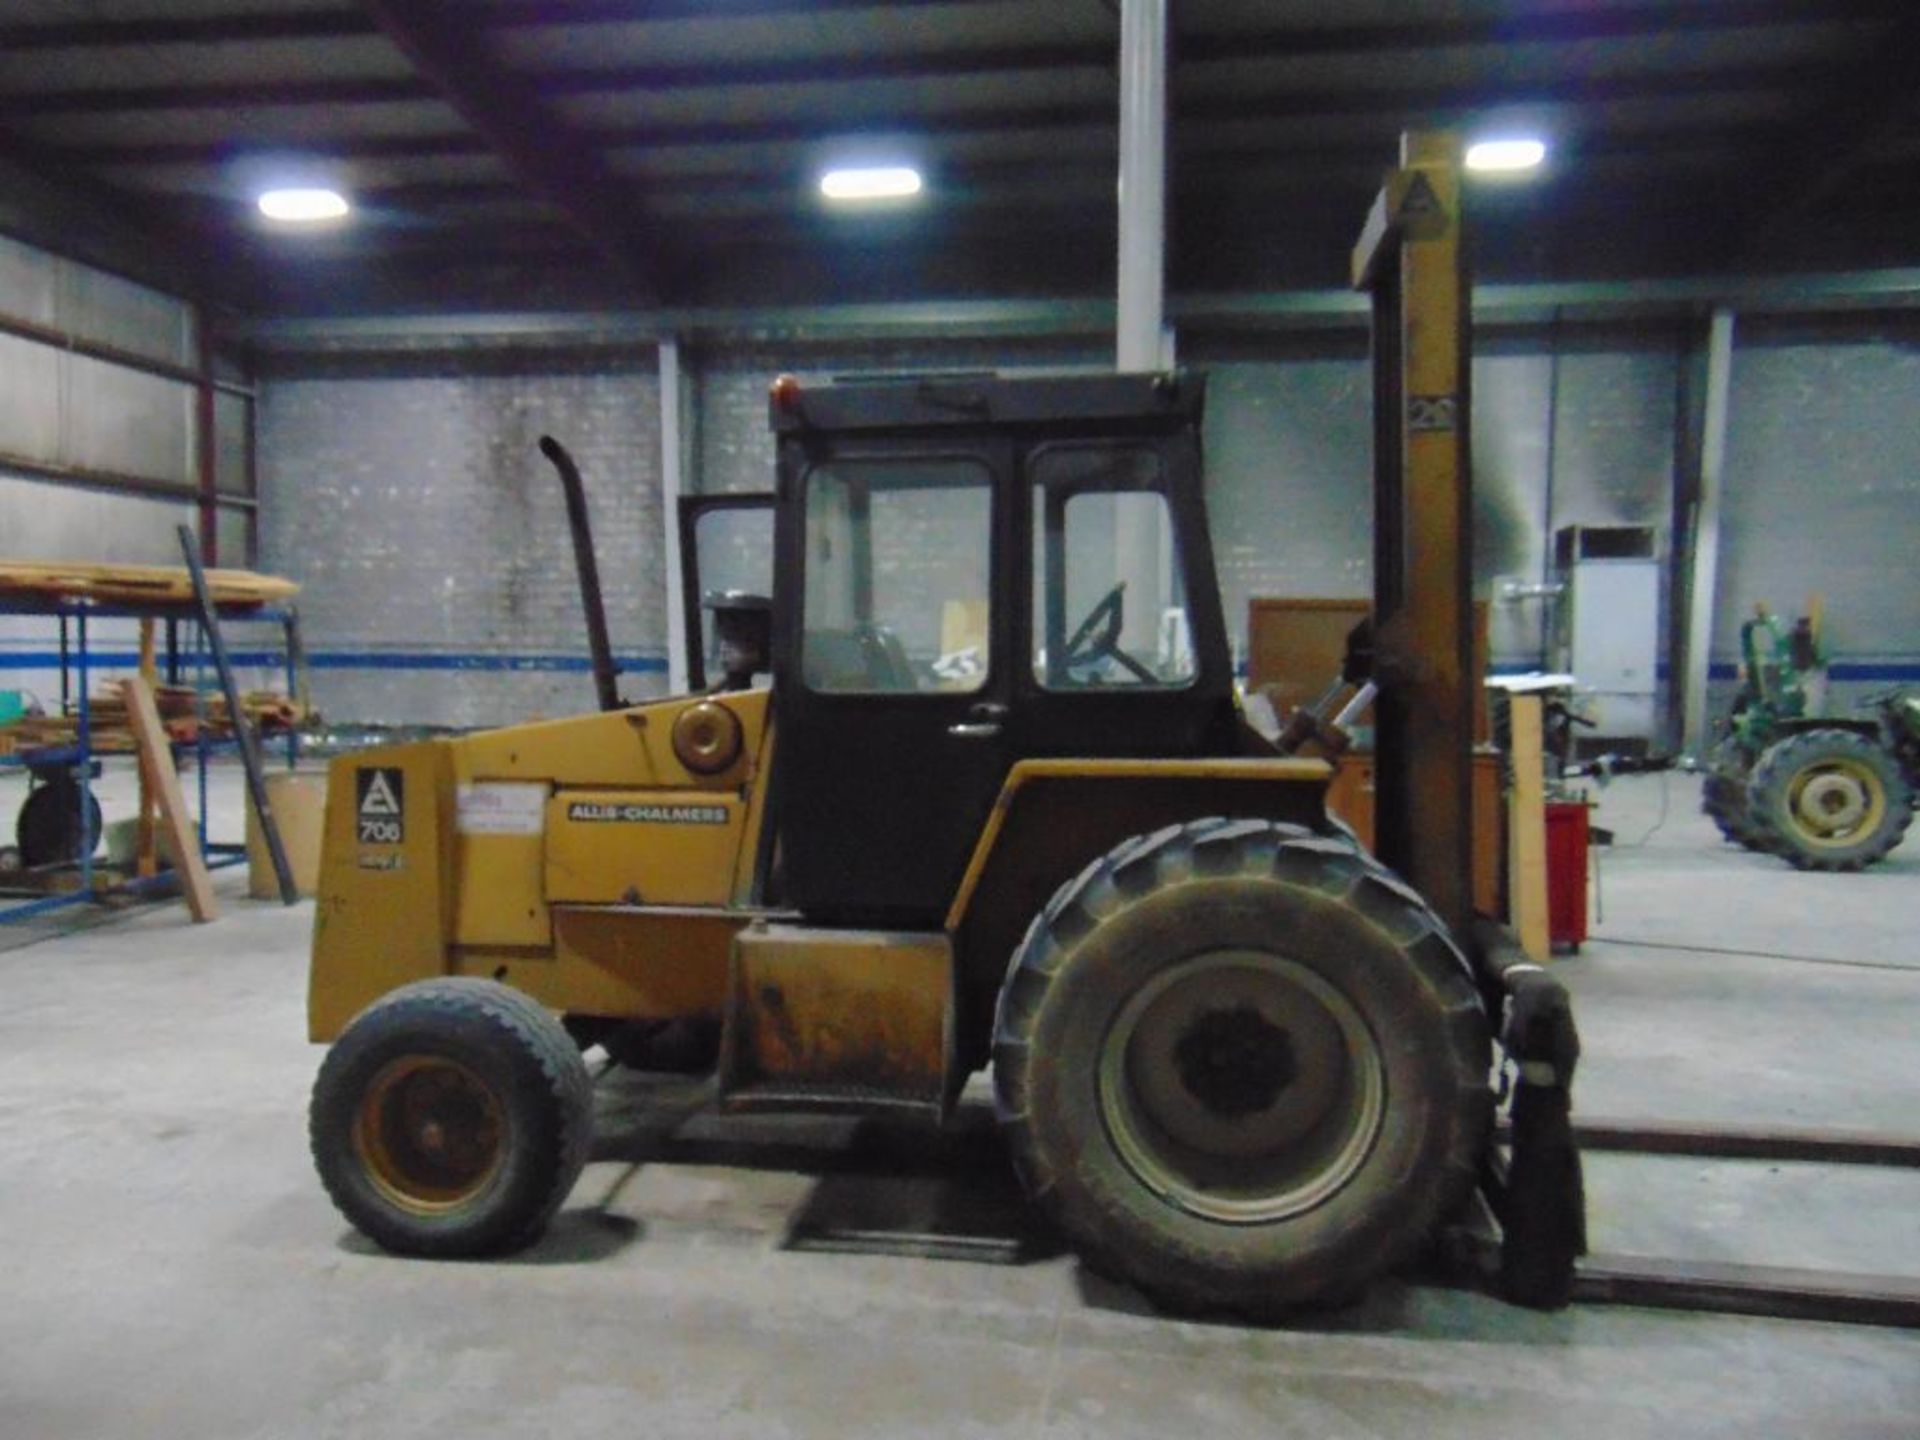 Allis Chalmers 706D All-Terrain Forklift - Image 3 of 17